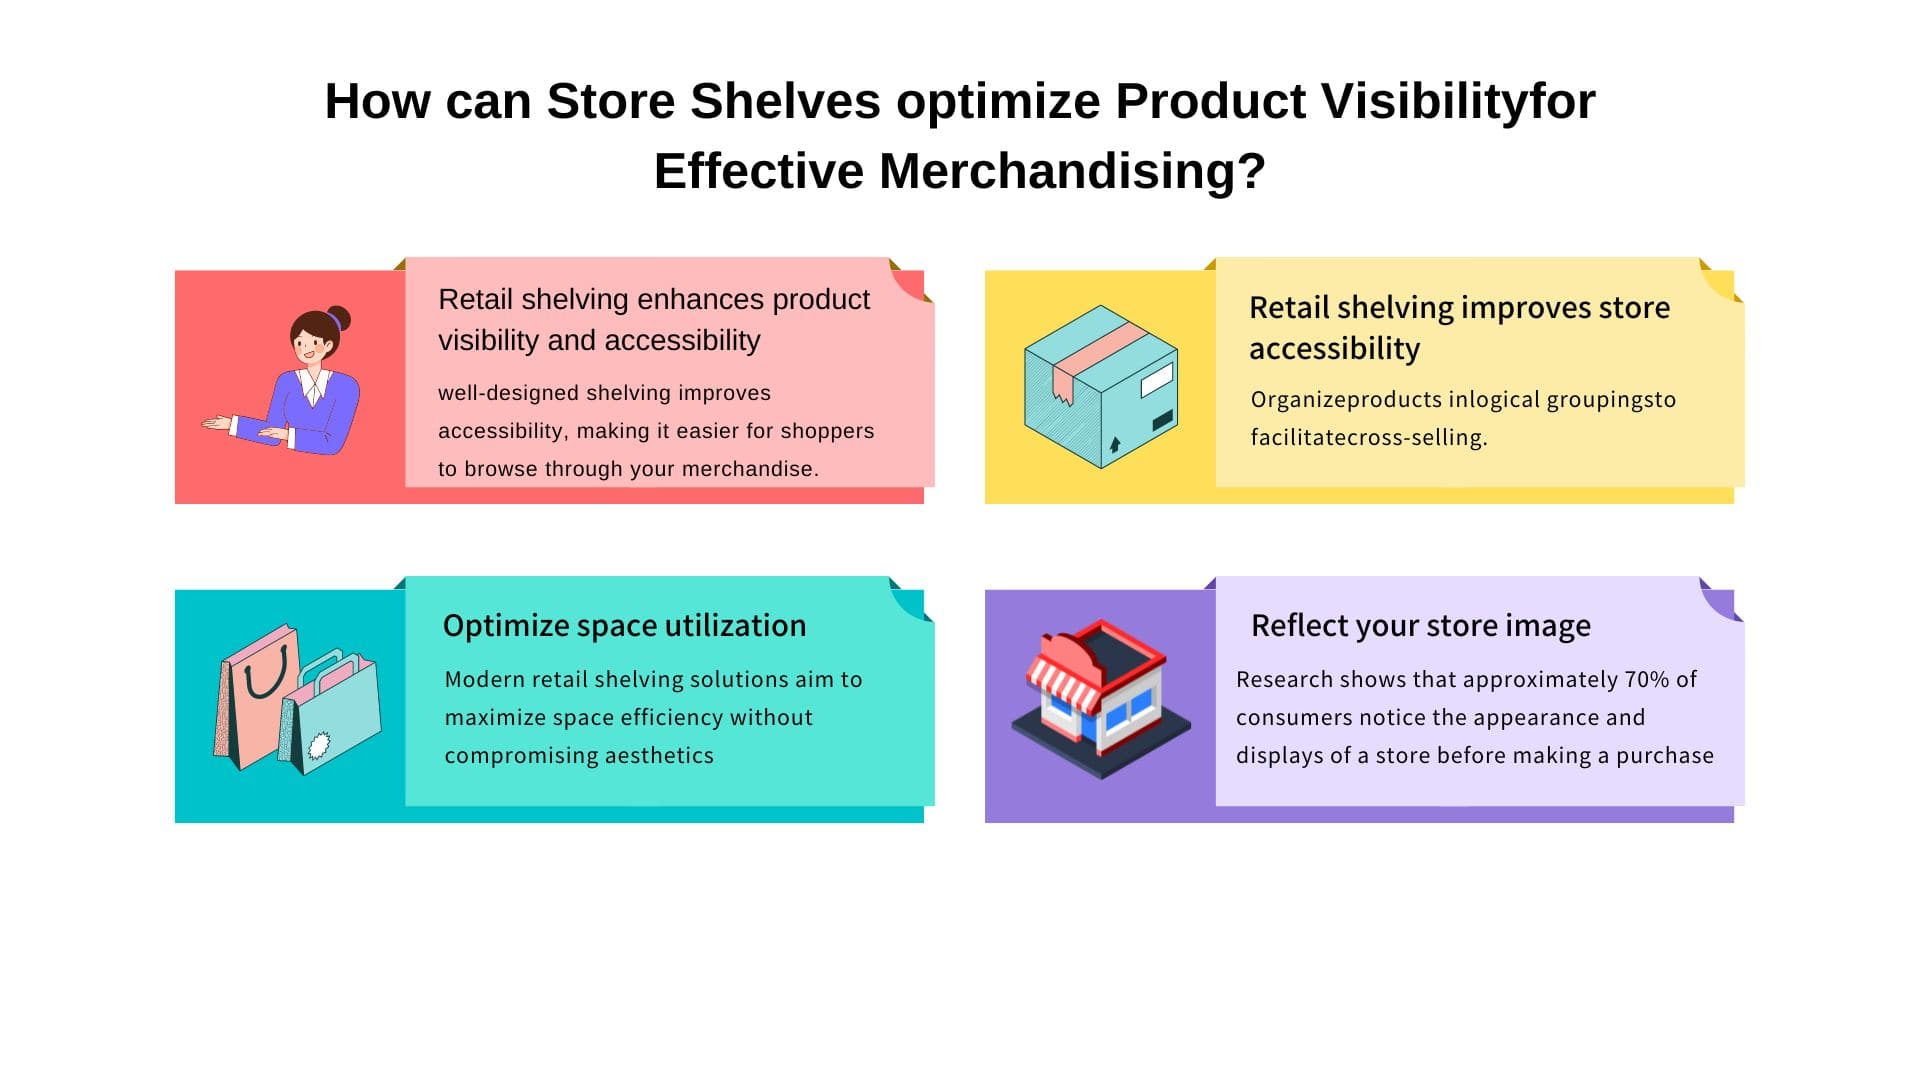 How can Store Shelves optimize Product Visibilityfor Effective Merchandising